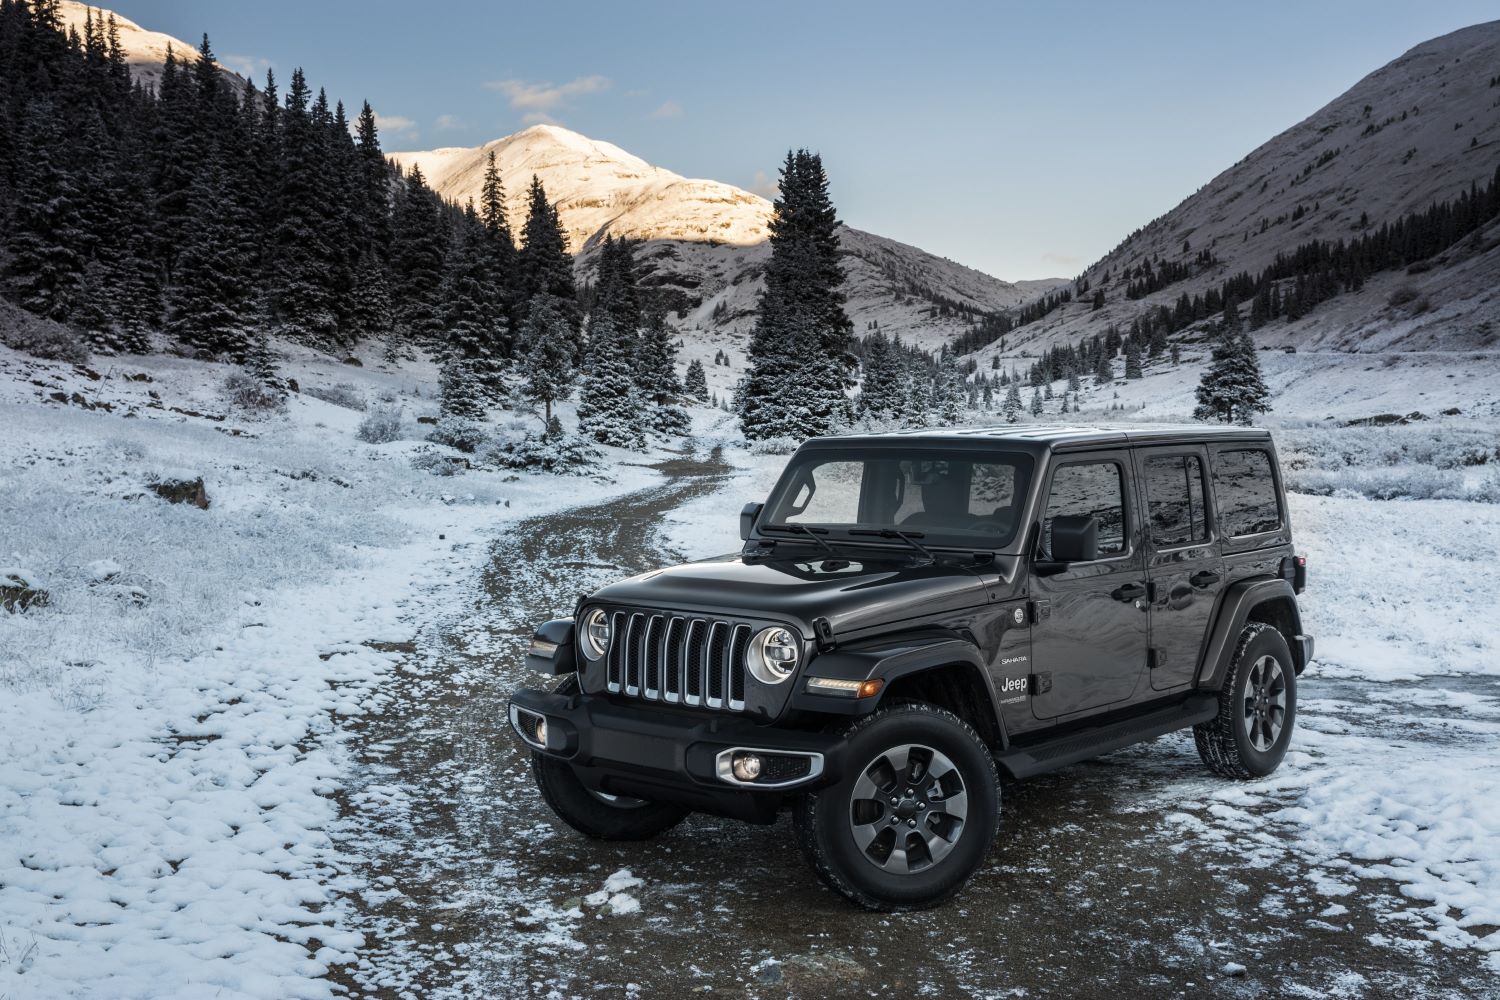 2020 Jeep Wrangler Unlimited Exterior 002 Front Three Quarters 